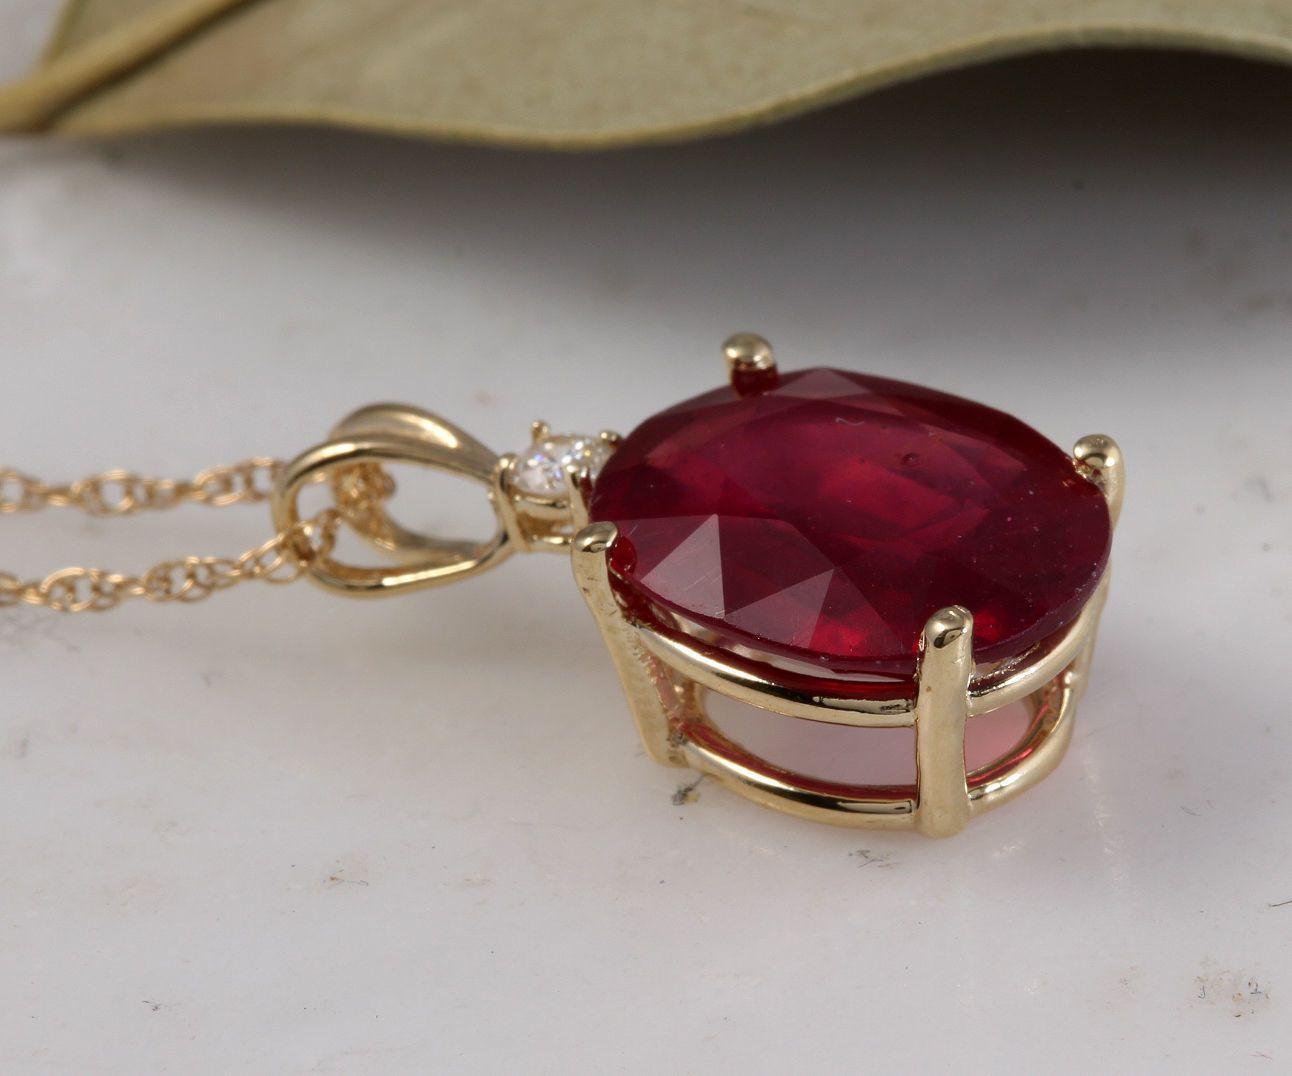 6.05Ct Natural Red Ruby and Diamond 14K Solid Yellow Gold Necklace

Amazing looking piece!

Stamped: 14K

Natural Oval Cut Ruby Weights: 6.00 Carats

Ruby Measures: 12 x 10mm

Total Natural Round Diamond weights: 0.05 Carats (H / SI1)

Total Chain